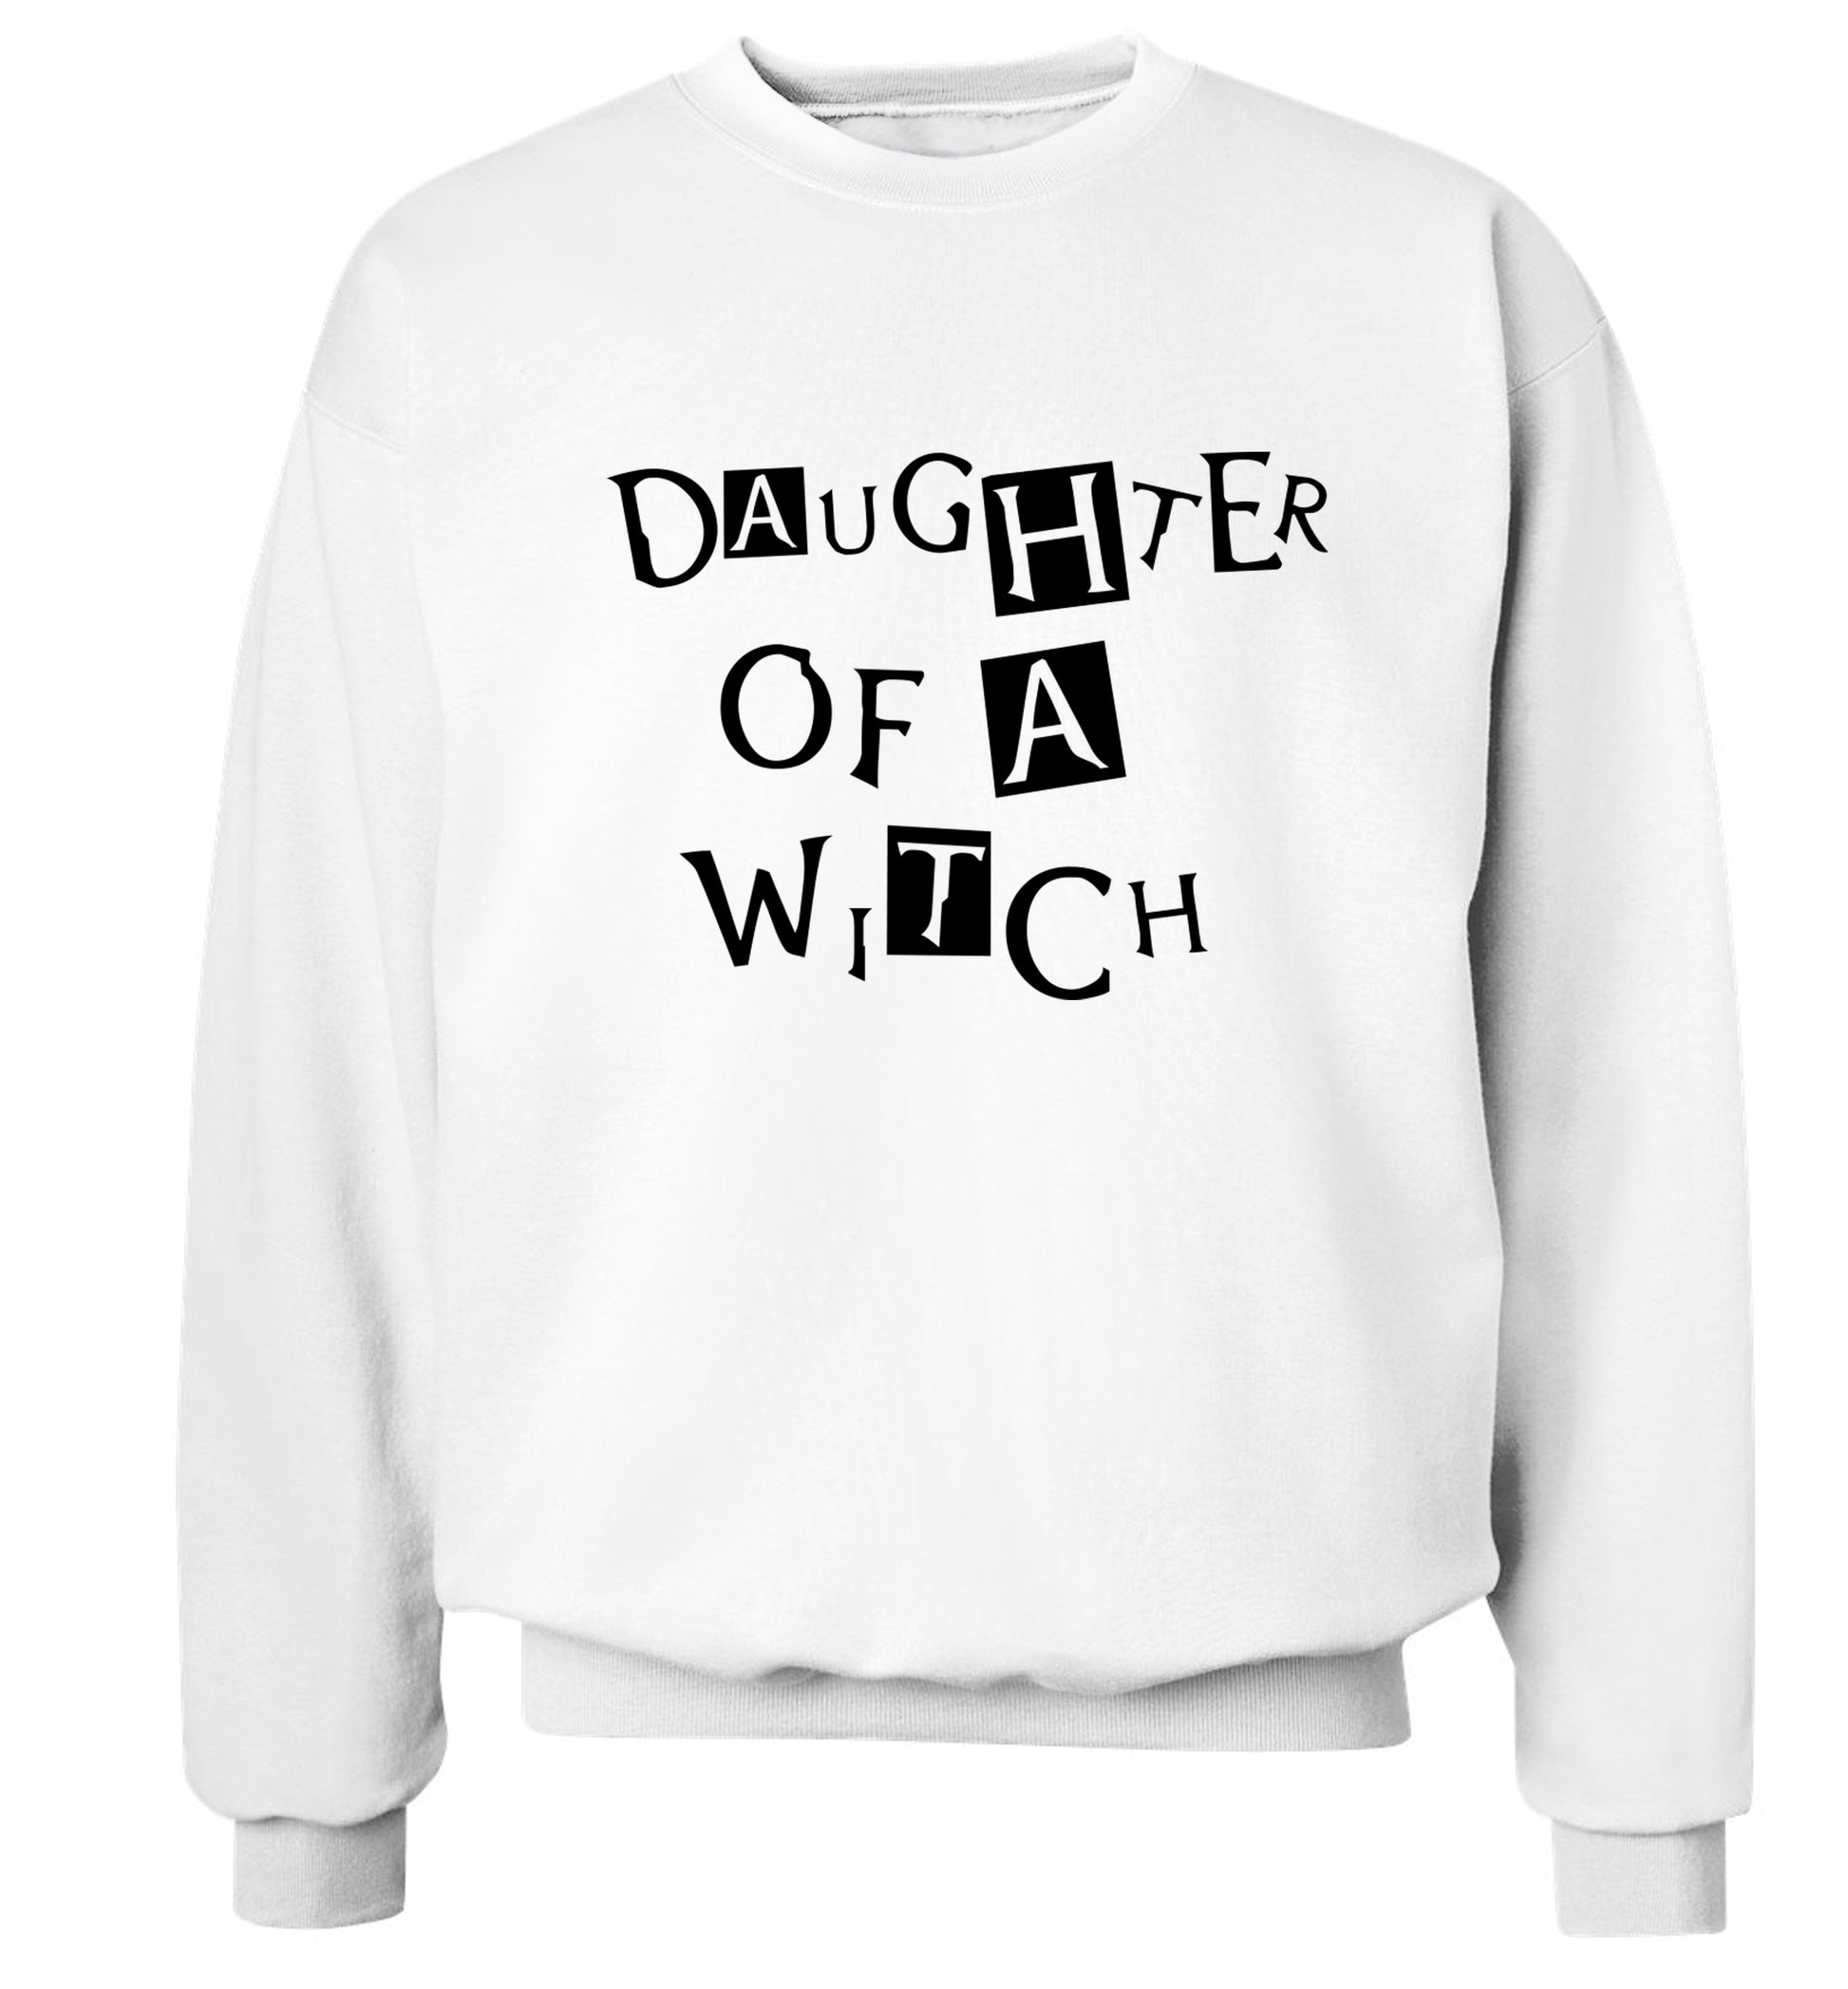 Daughter of a witch Adult's unisex white Sweater 2XL